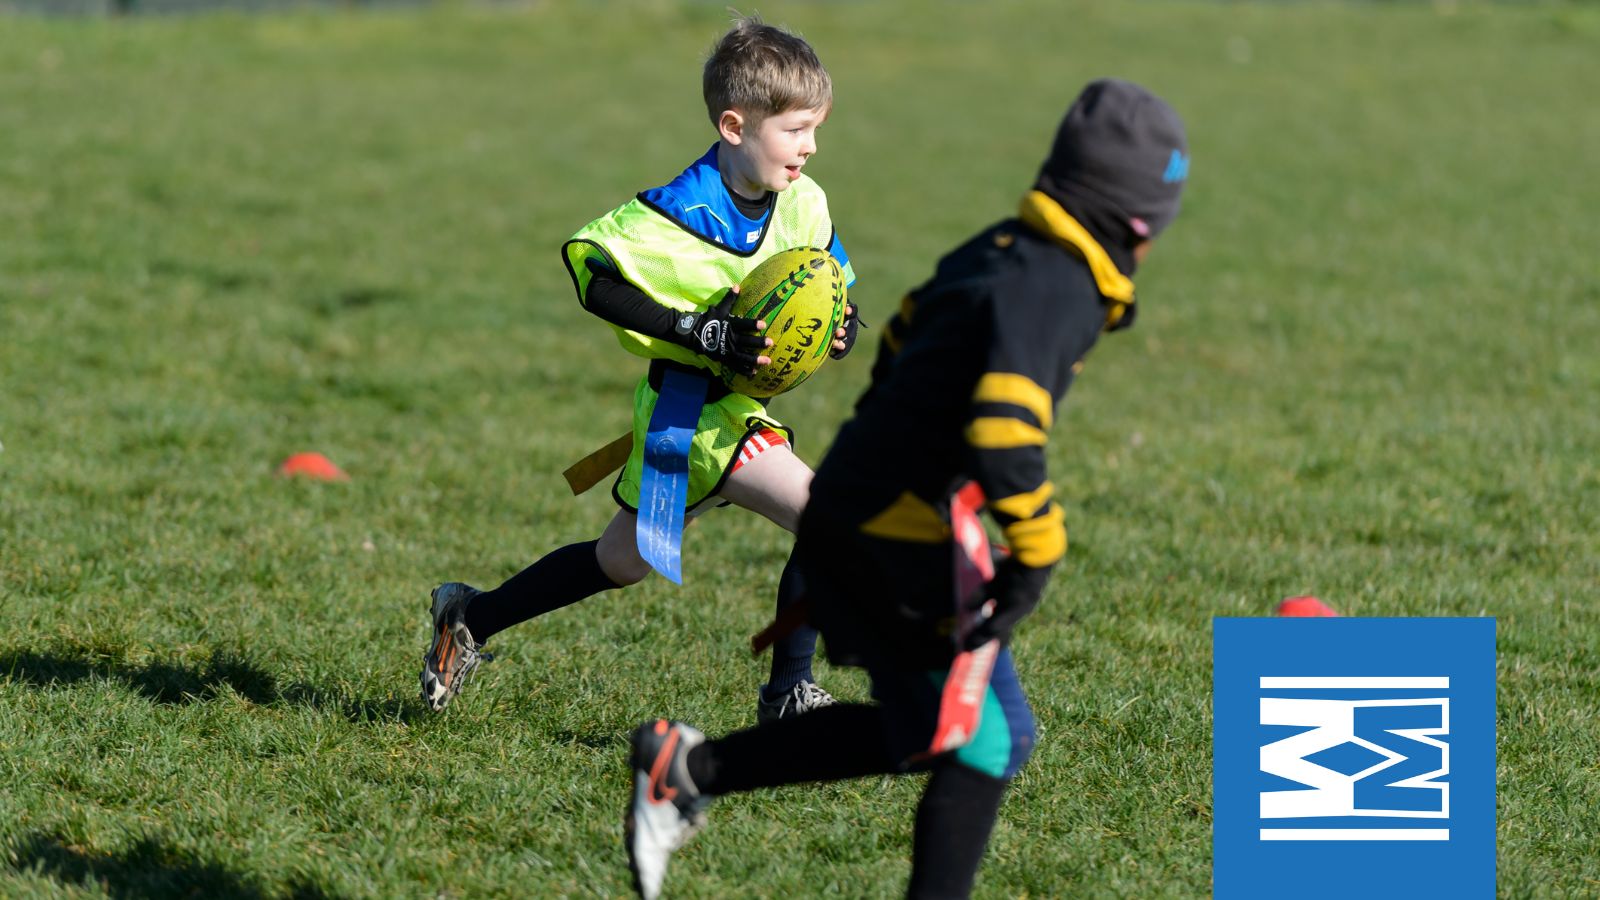 Move More Tewkesbury tag rugby festival